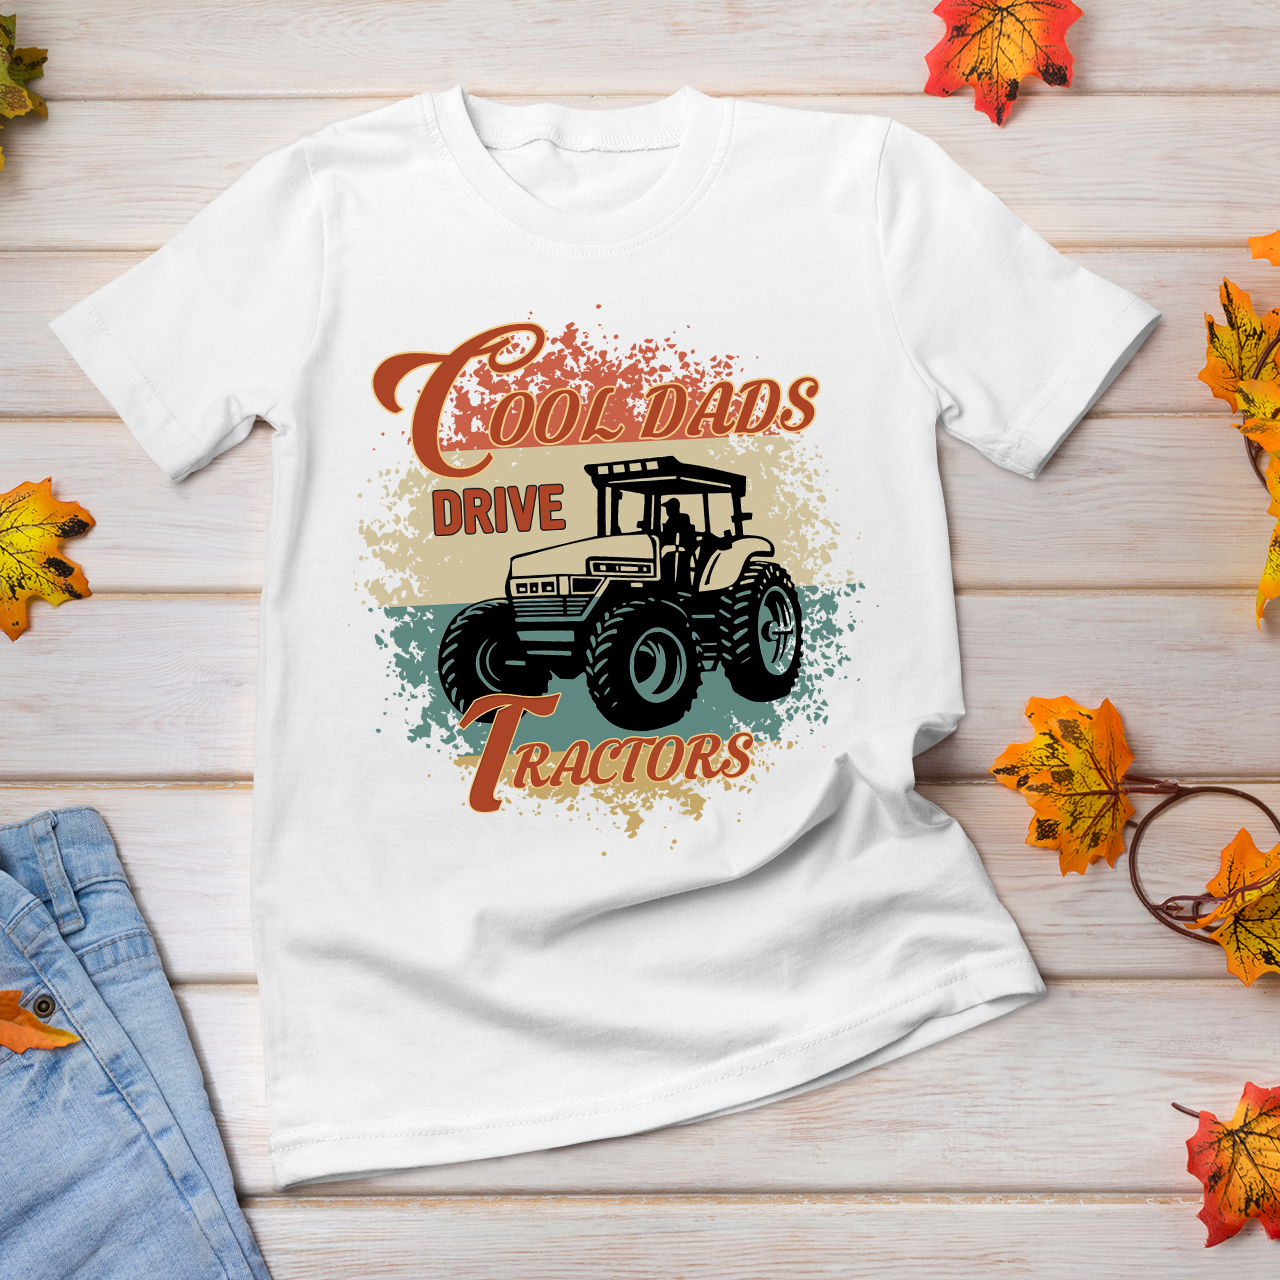 Best Gift For Farming Dad, Father’s Day 2021, Tractors T-shirt